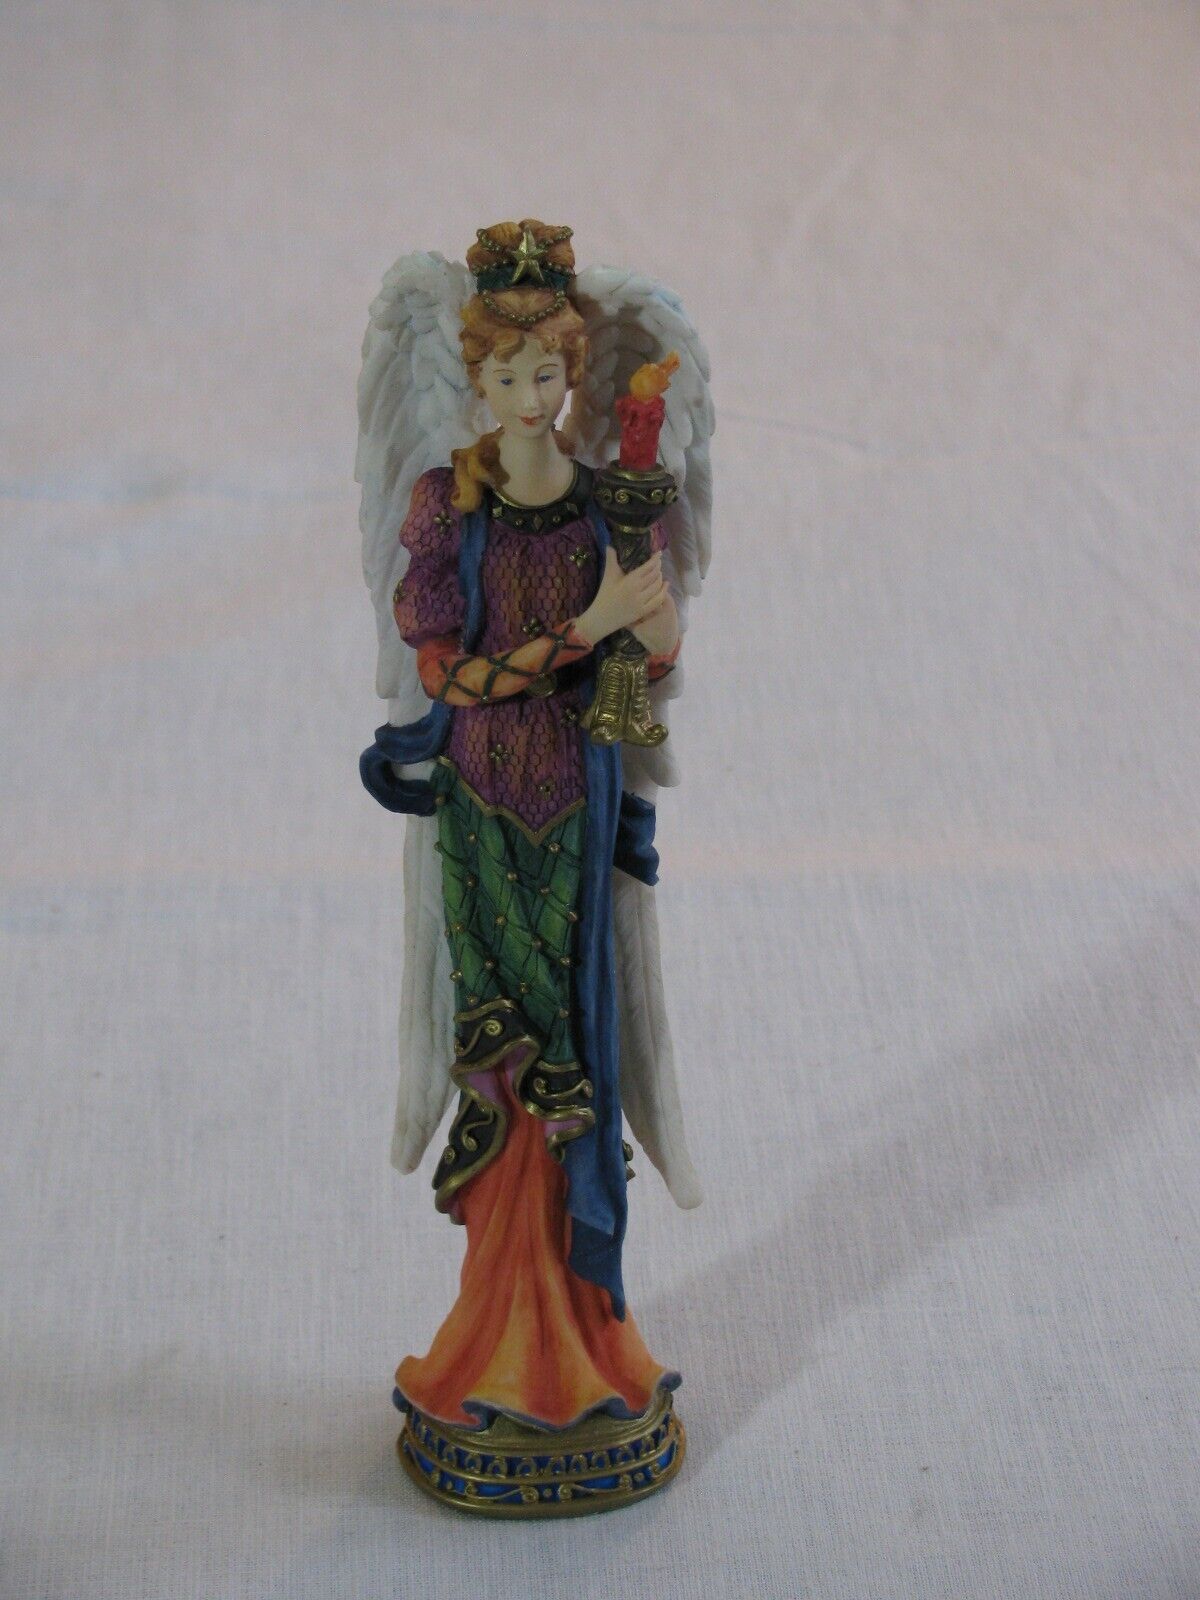 Vtg Lenox Pencil Collection Handcrafted Angel w/Torch Figurine, 1998 r